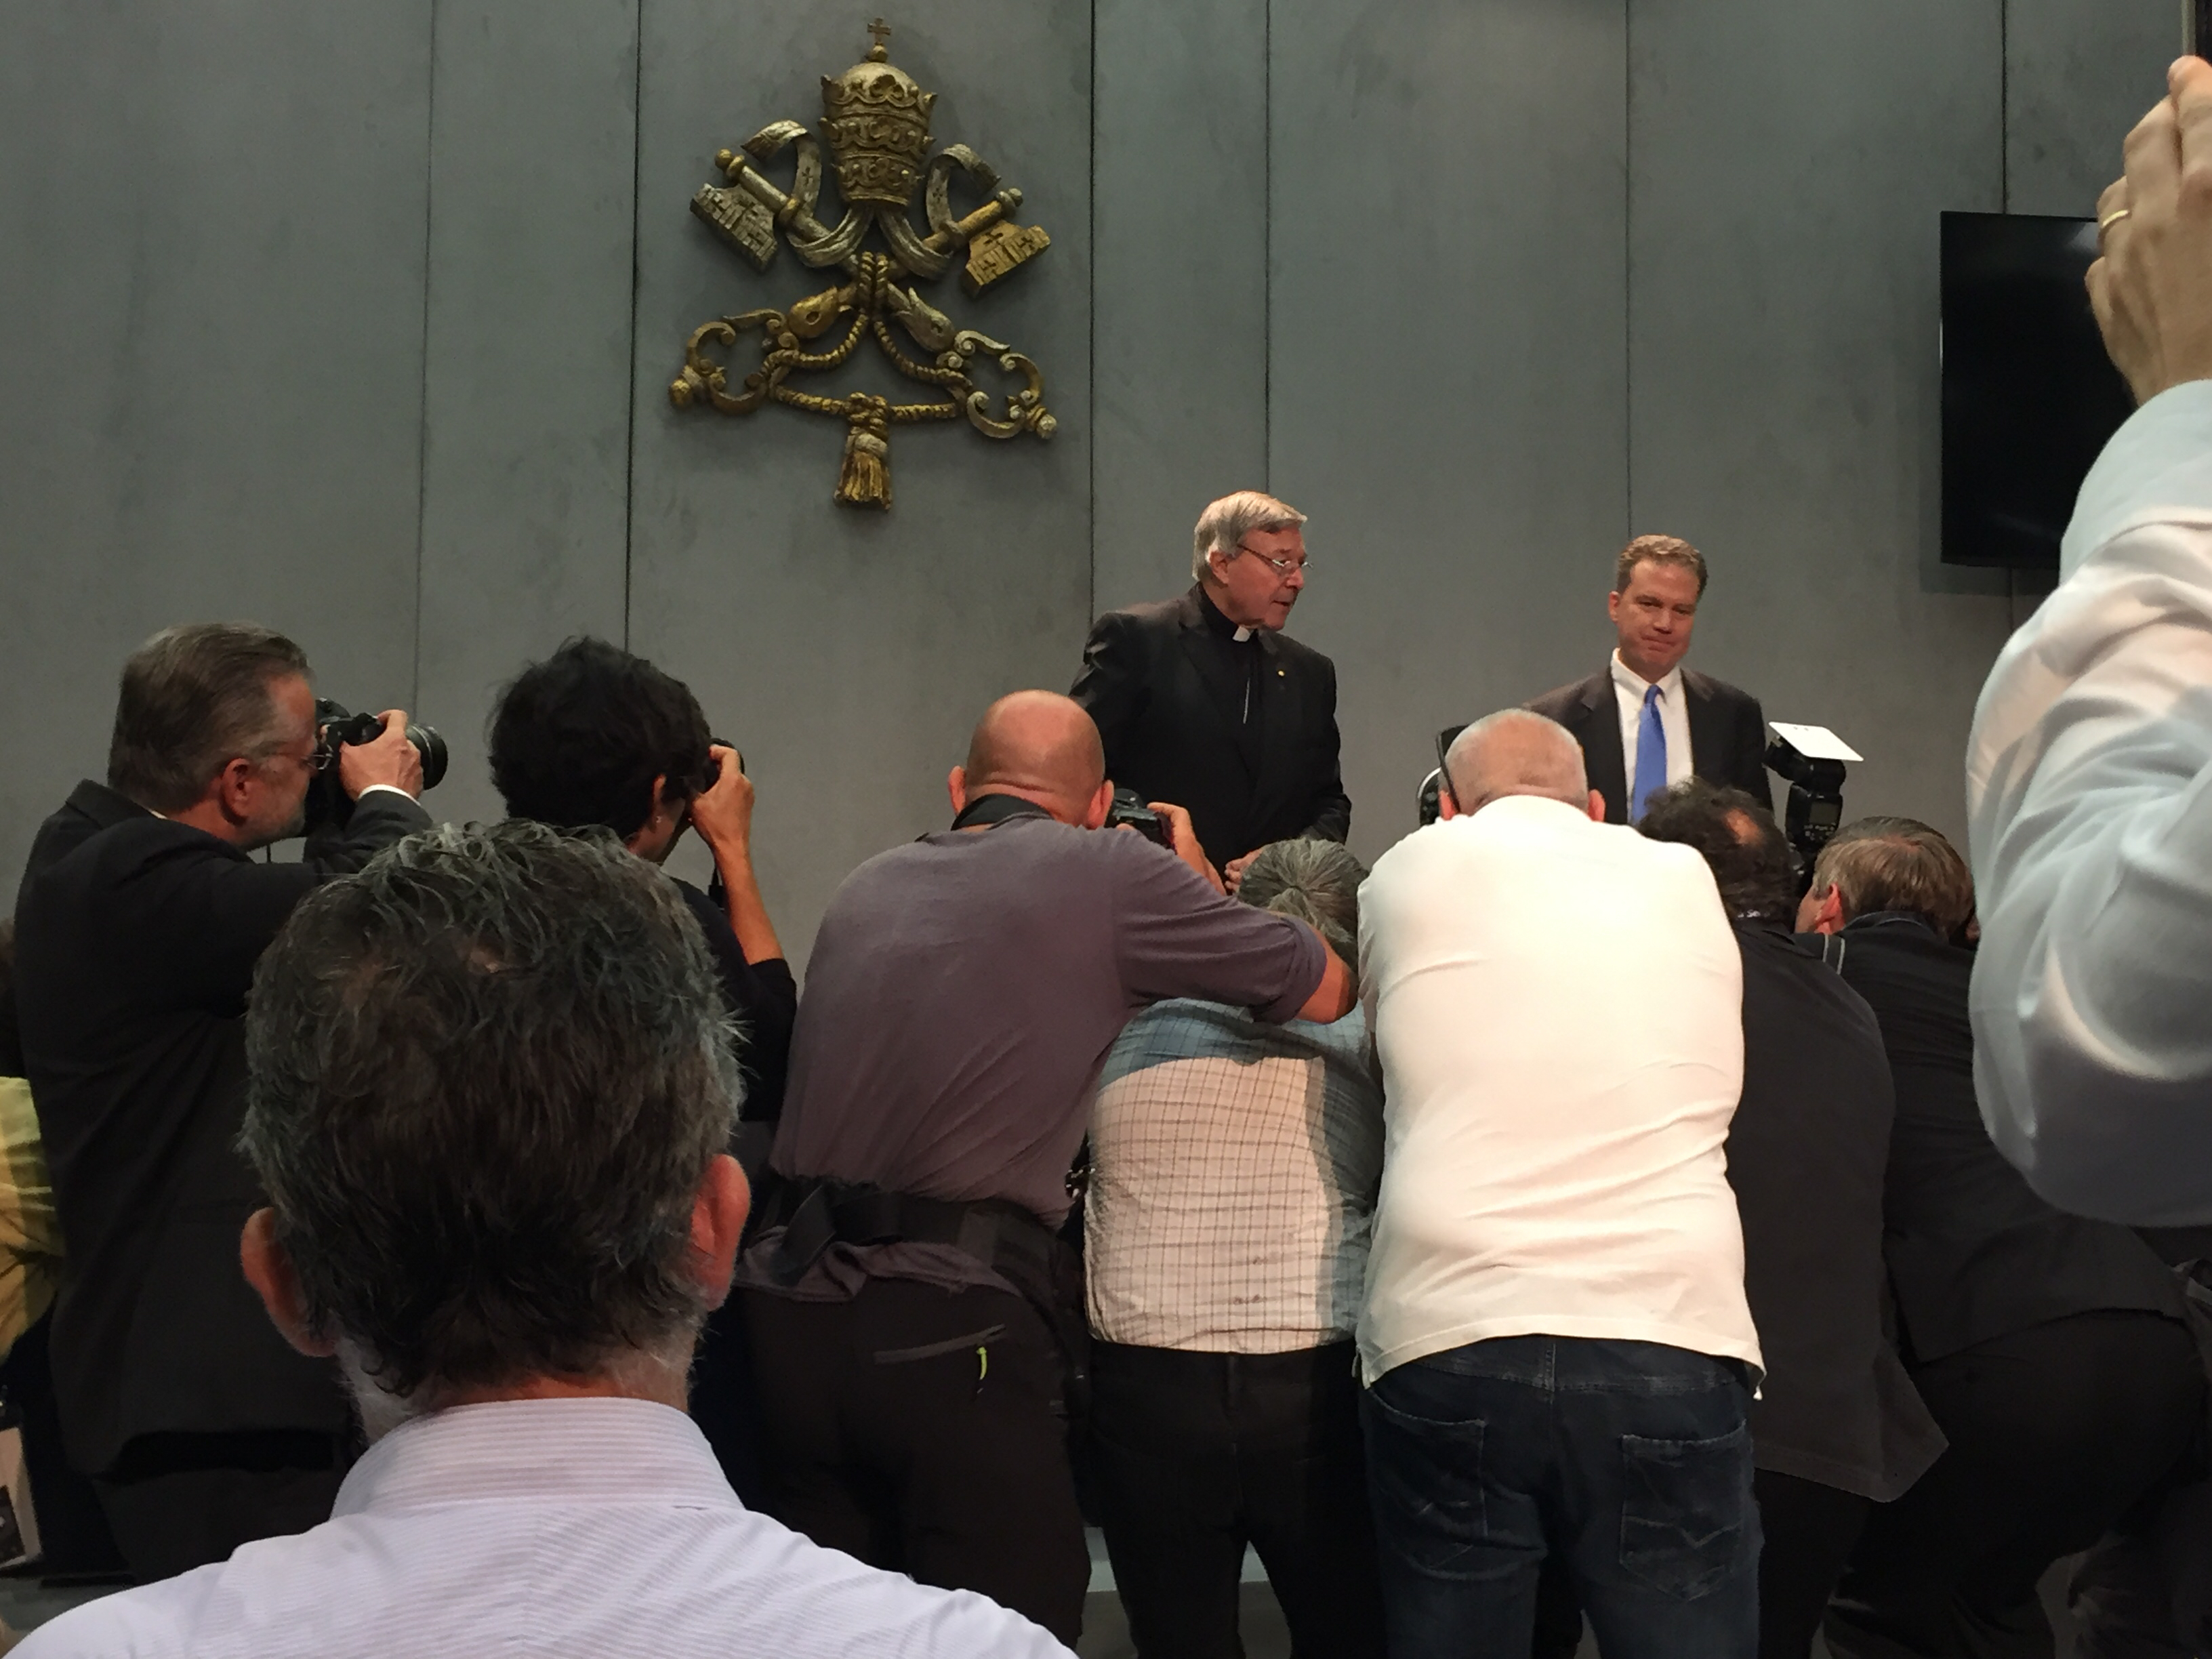 Cardinal Pell and Greg Burke speaking to the press (photo by author)